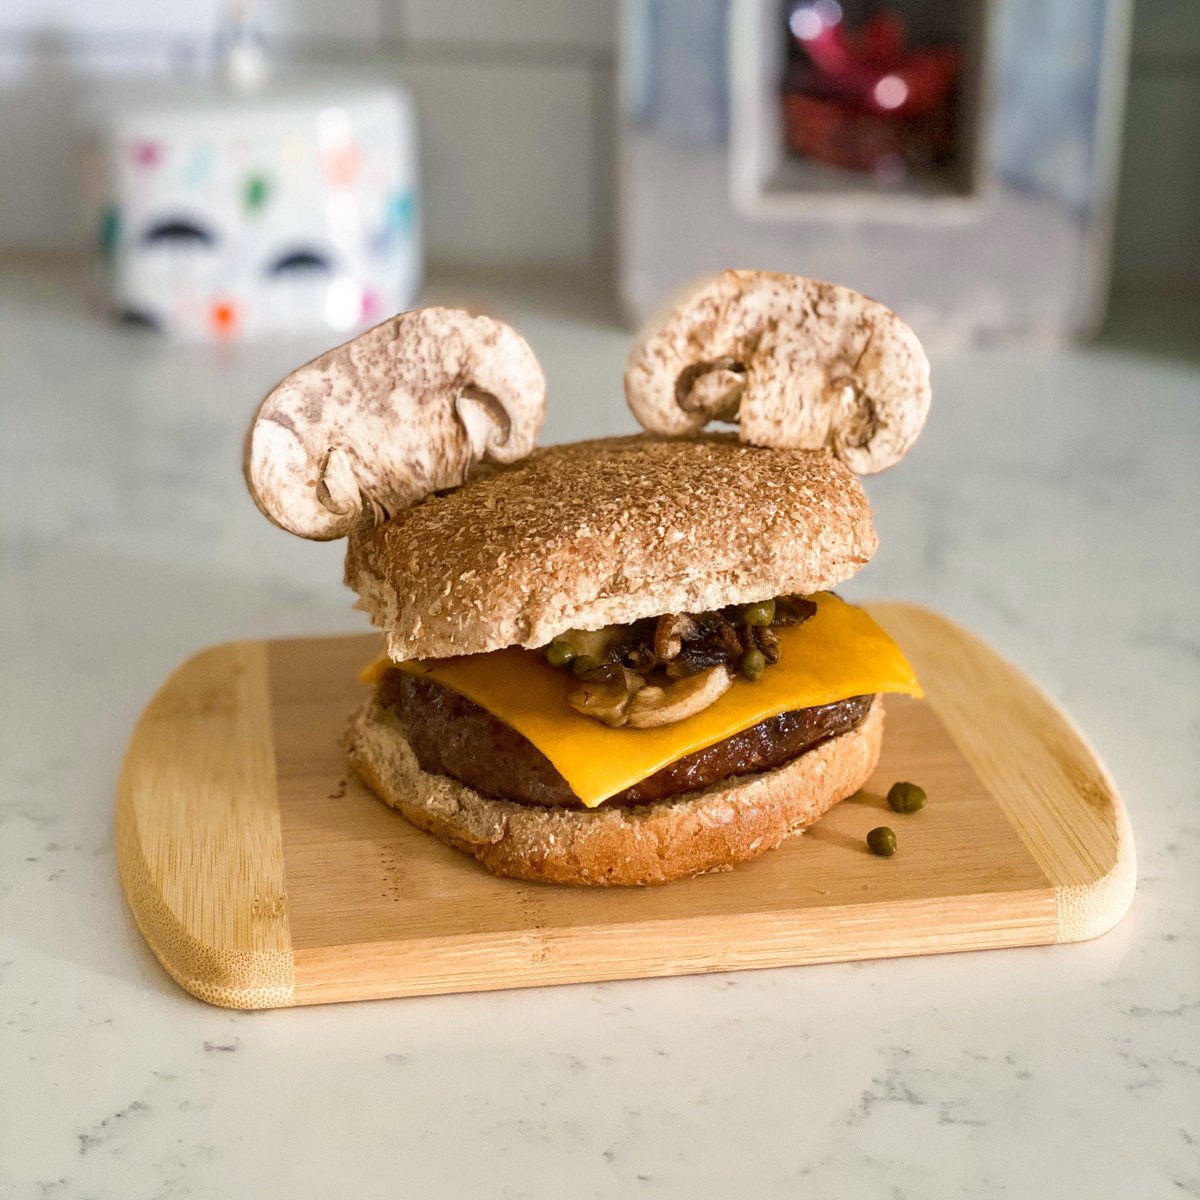 Disney Quarantine Food Festival lunch today!Angus burger on a wheat bun with mild cheddar, sautéed mushrooms and capers.